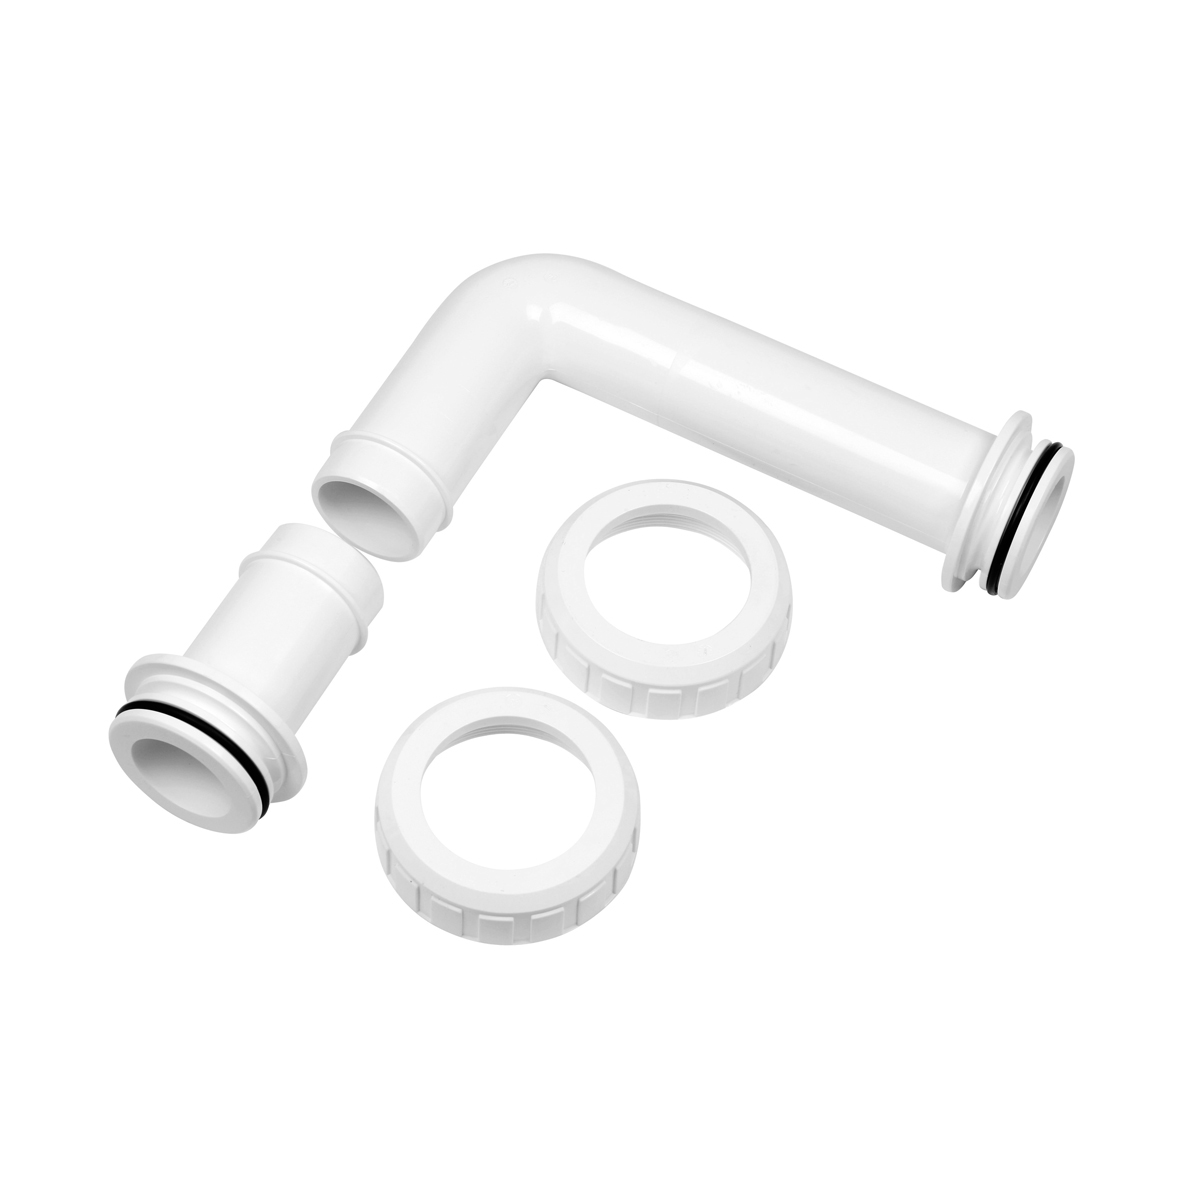 Pipe-system for back wash valve with union-nut 1 1/2" PVC white d50 Pipe-system for back wash valve with union-nut 1 1/2" PVC white d50